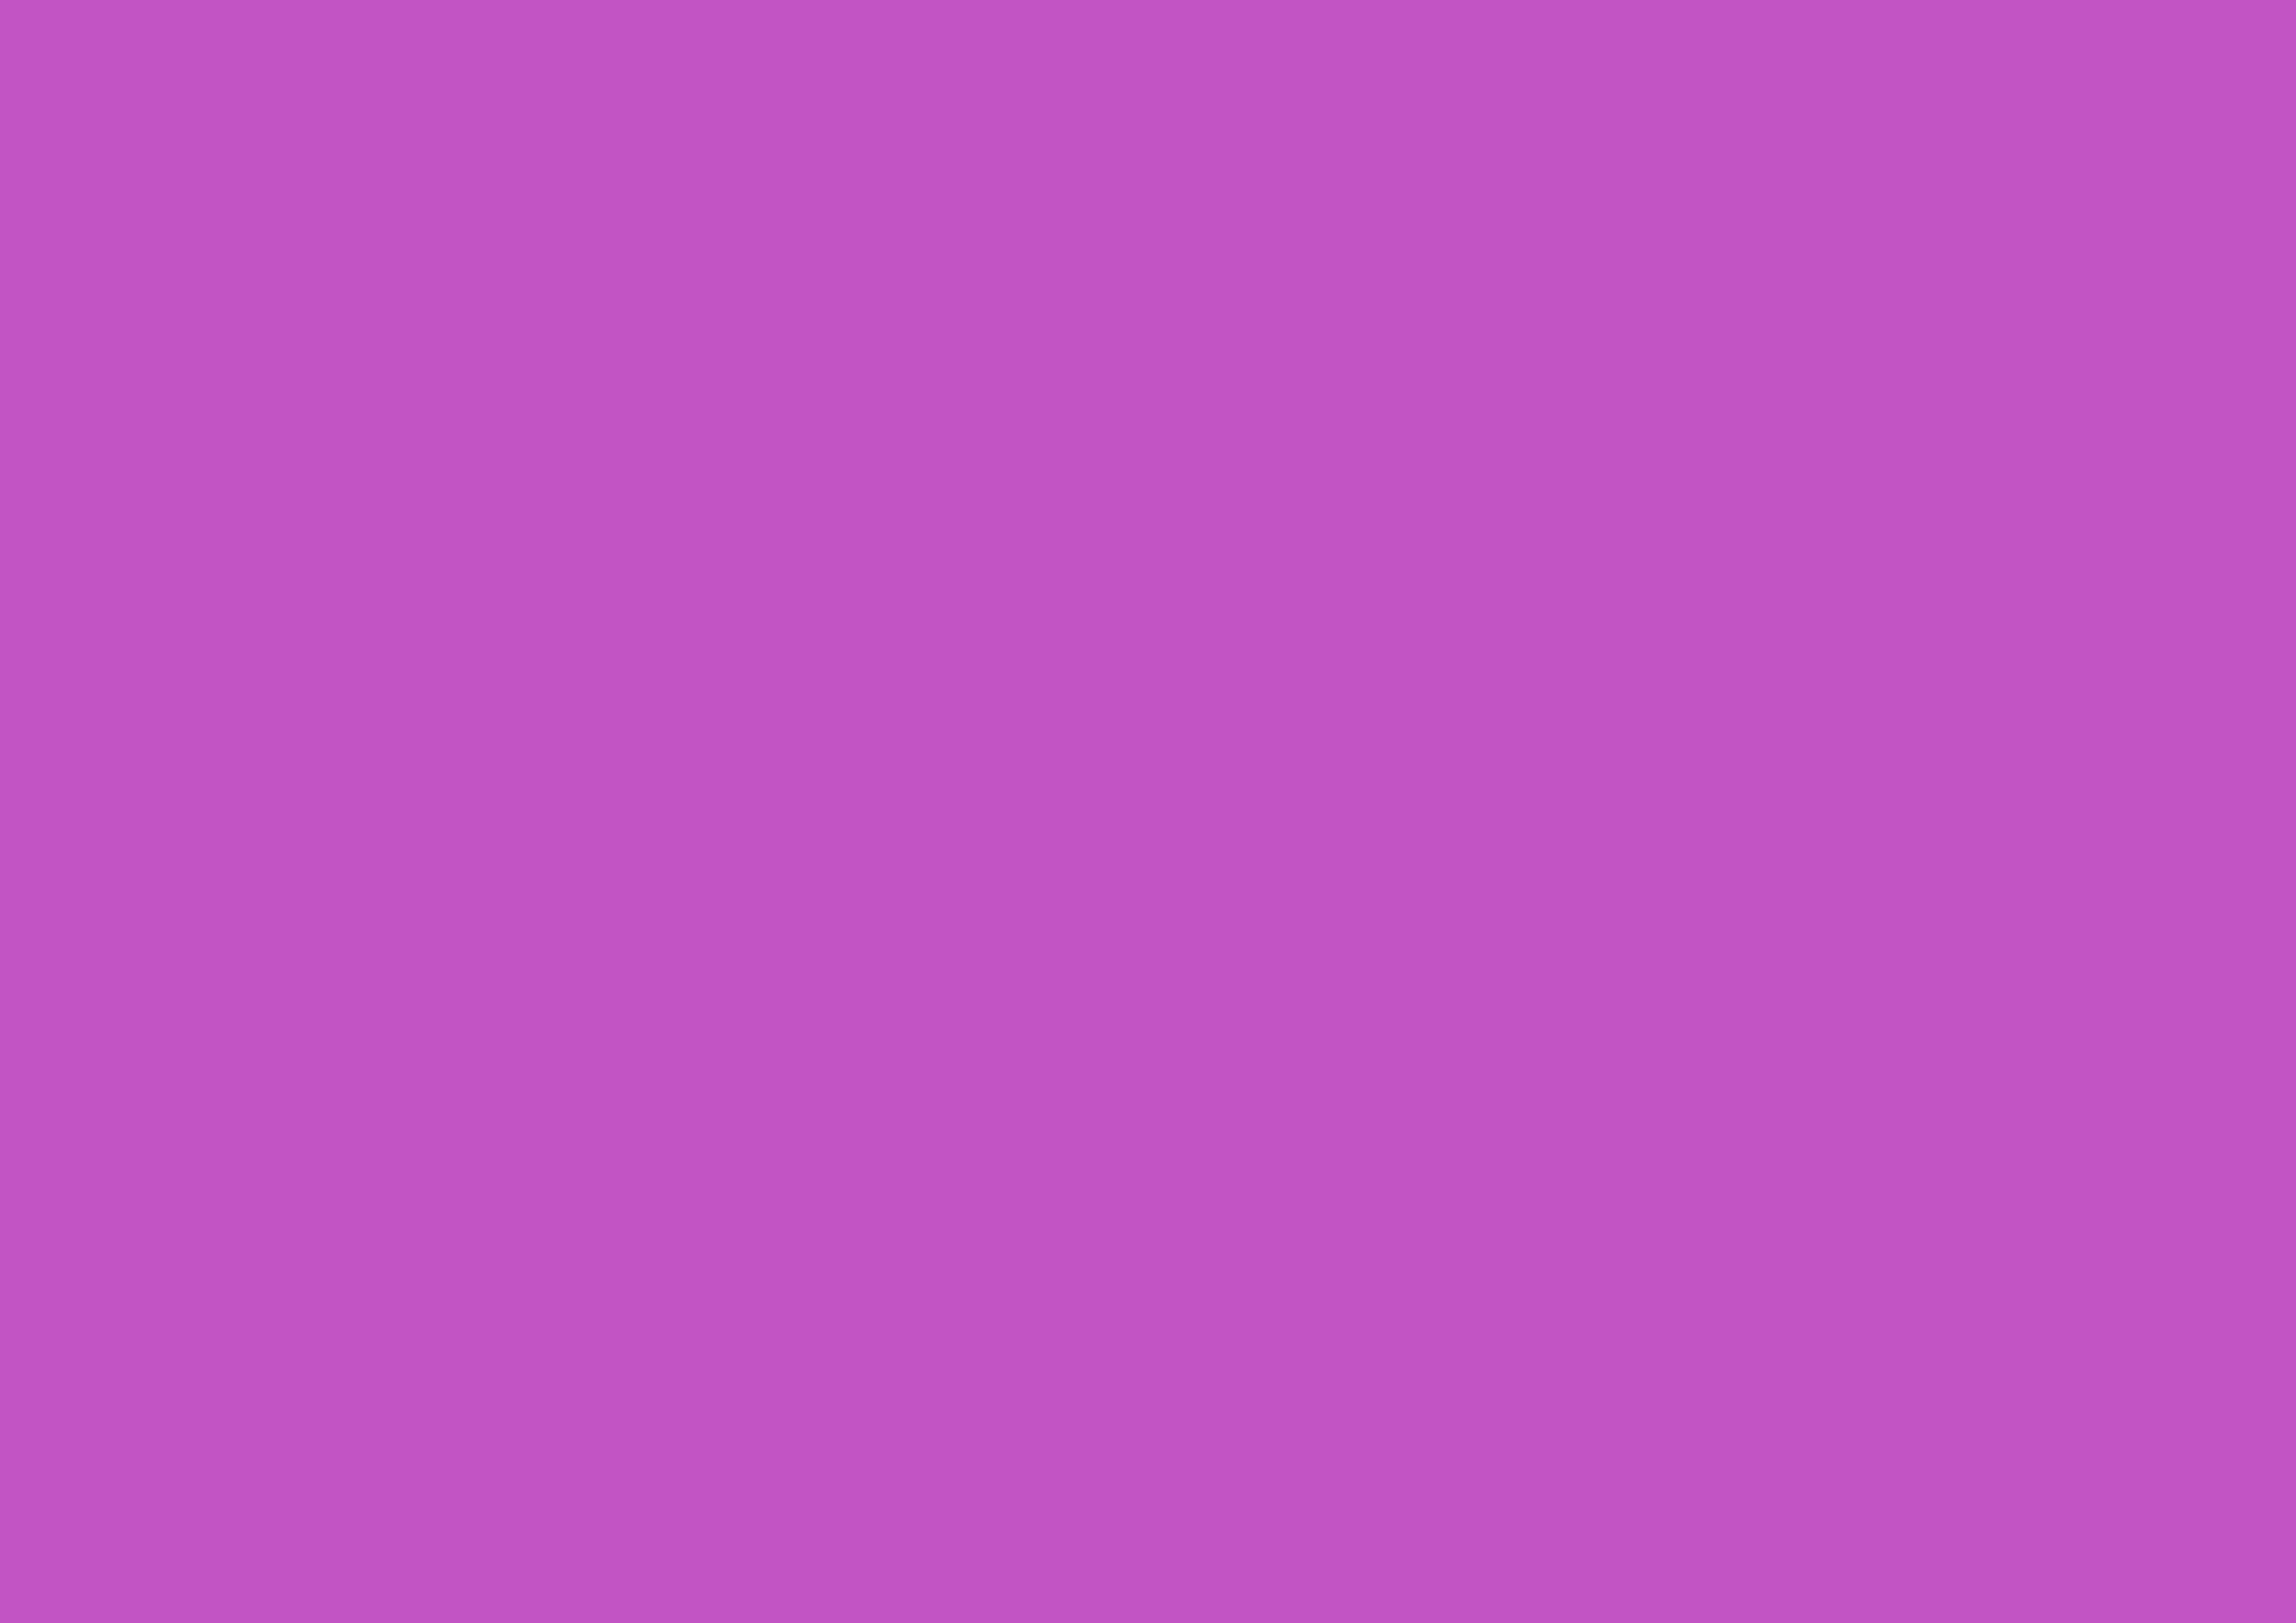 3508x2480 Deep Fuchsia Solid Color Background